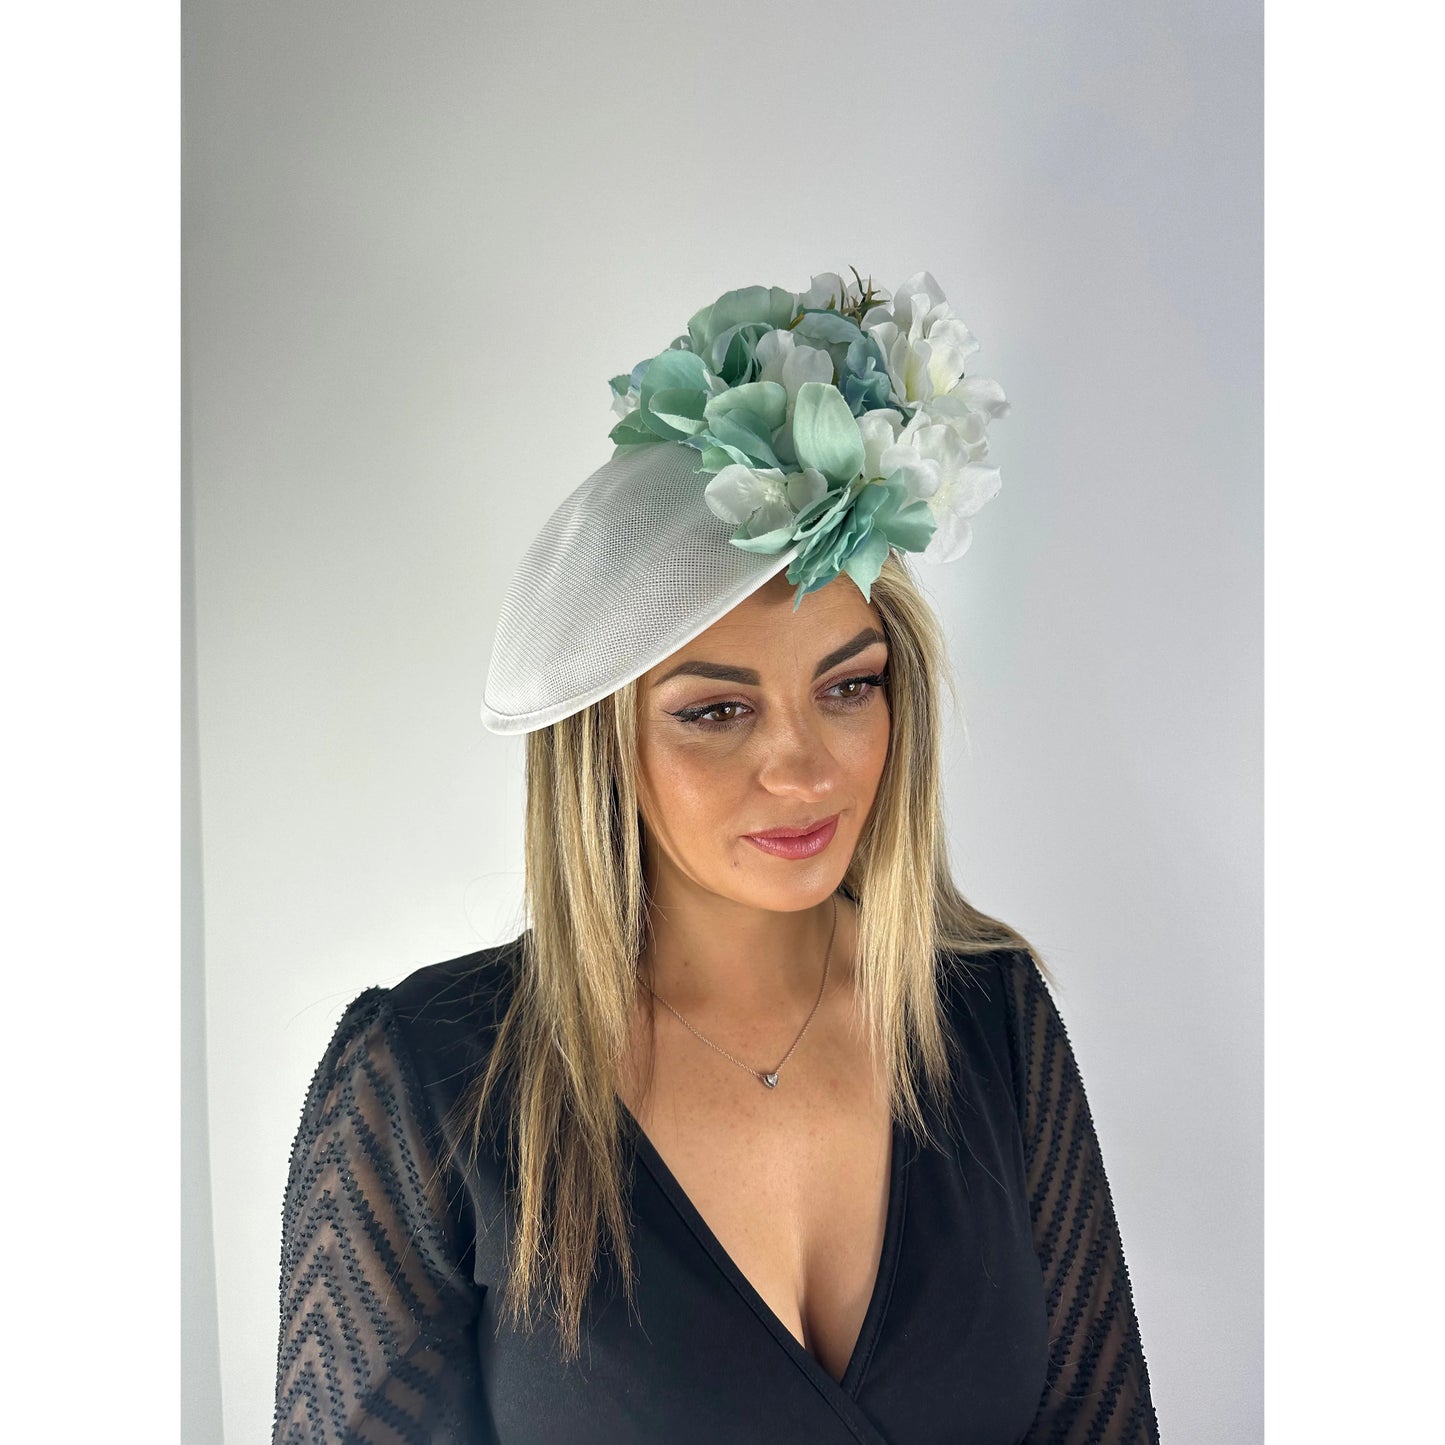 Keswick Ivory blue and green tone floral headpiece